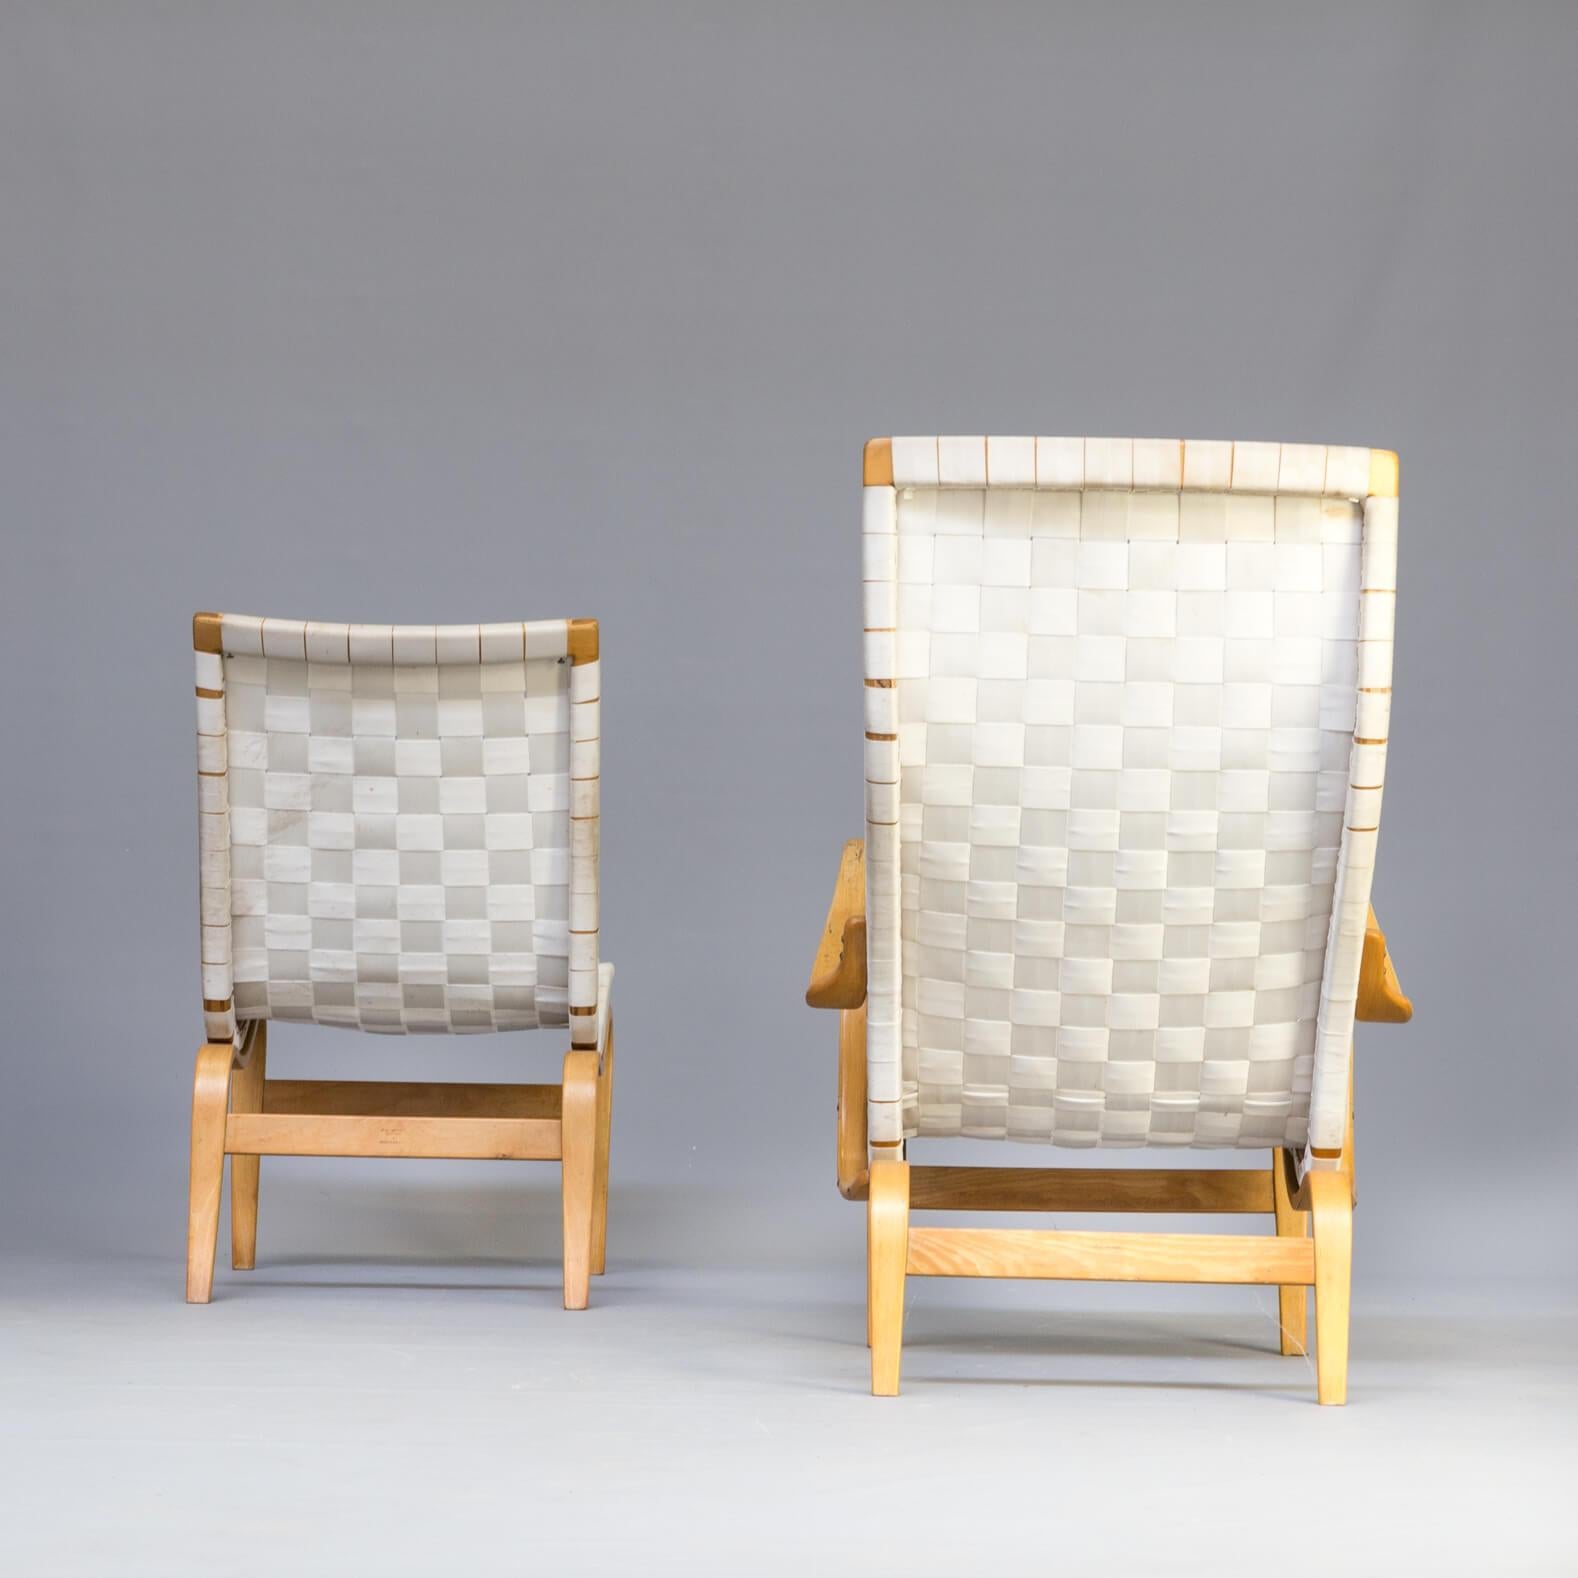 Beech 1970s Bruno Mathsson ‘Pernilla’ Chairs for Karl Mathsson Set of 2 For Sale